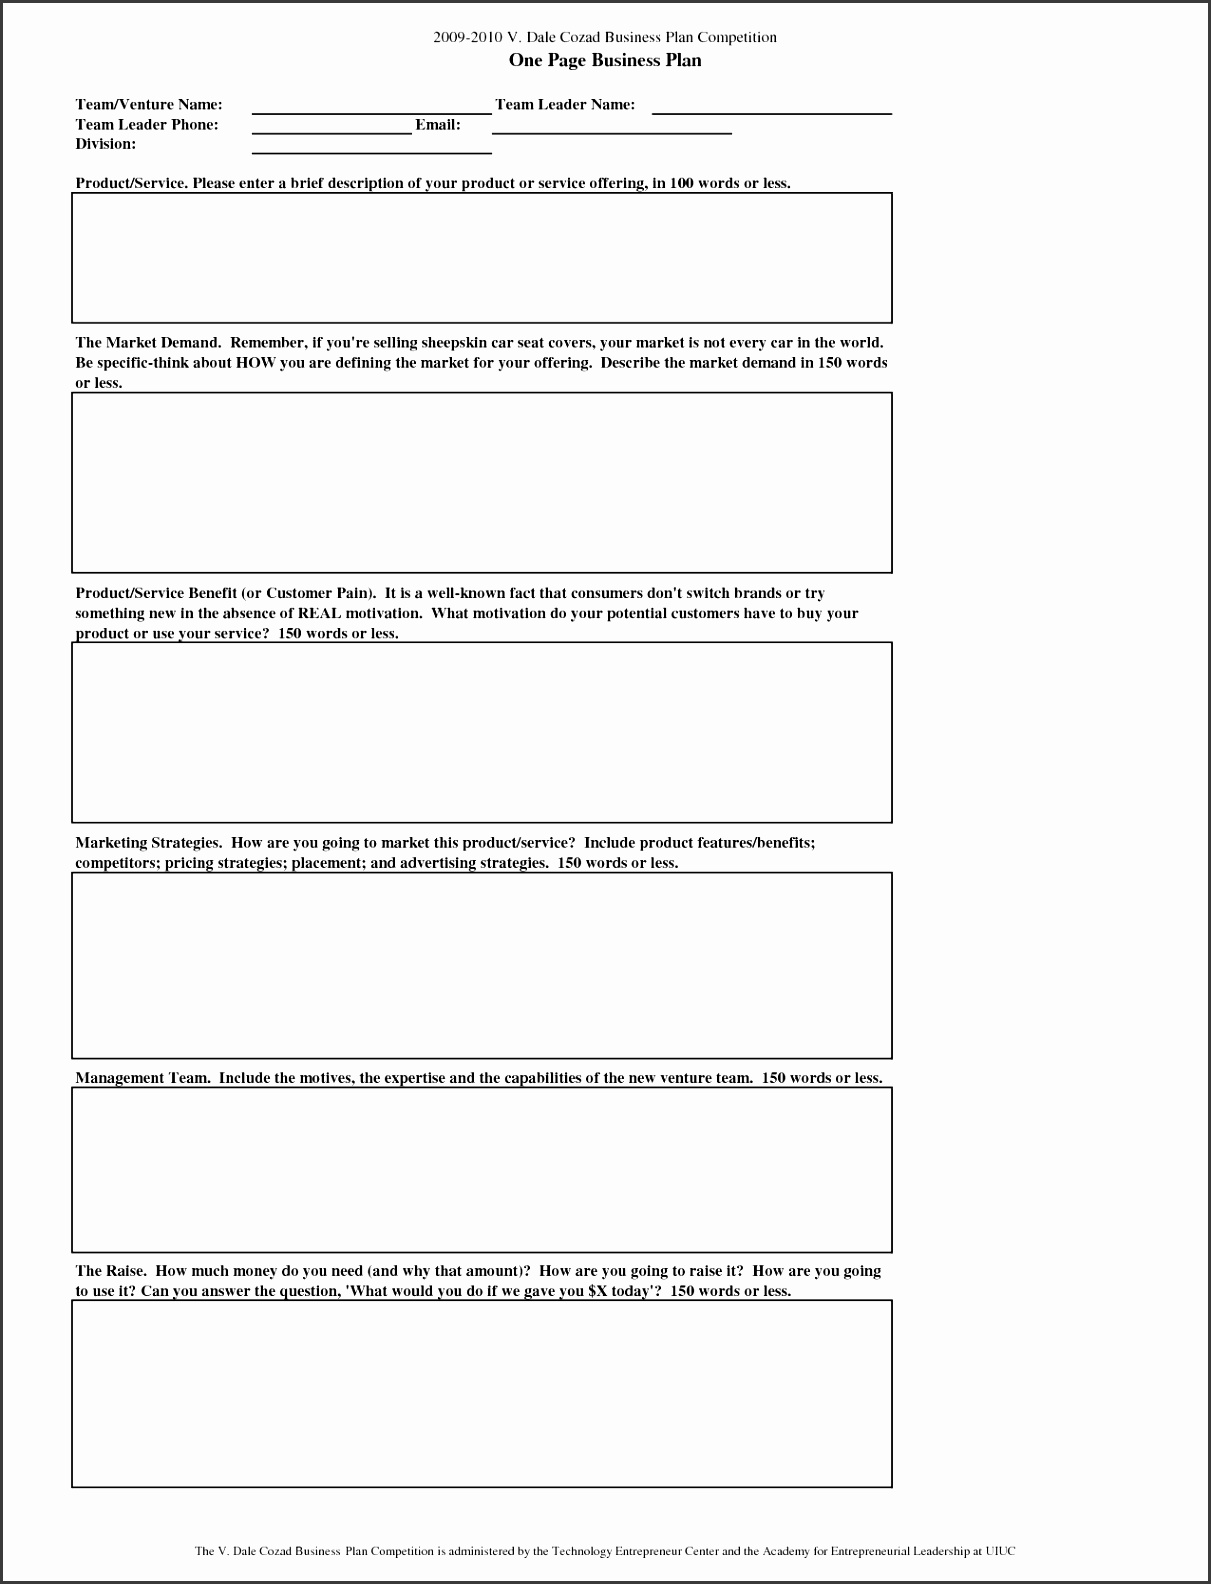 one page business plan template by Dale Cozad